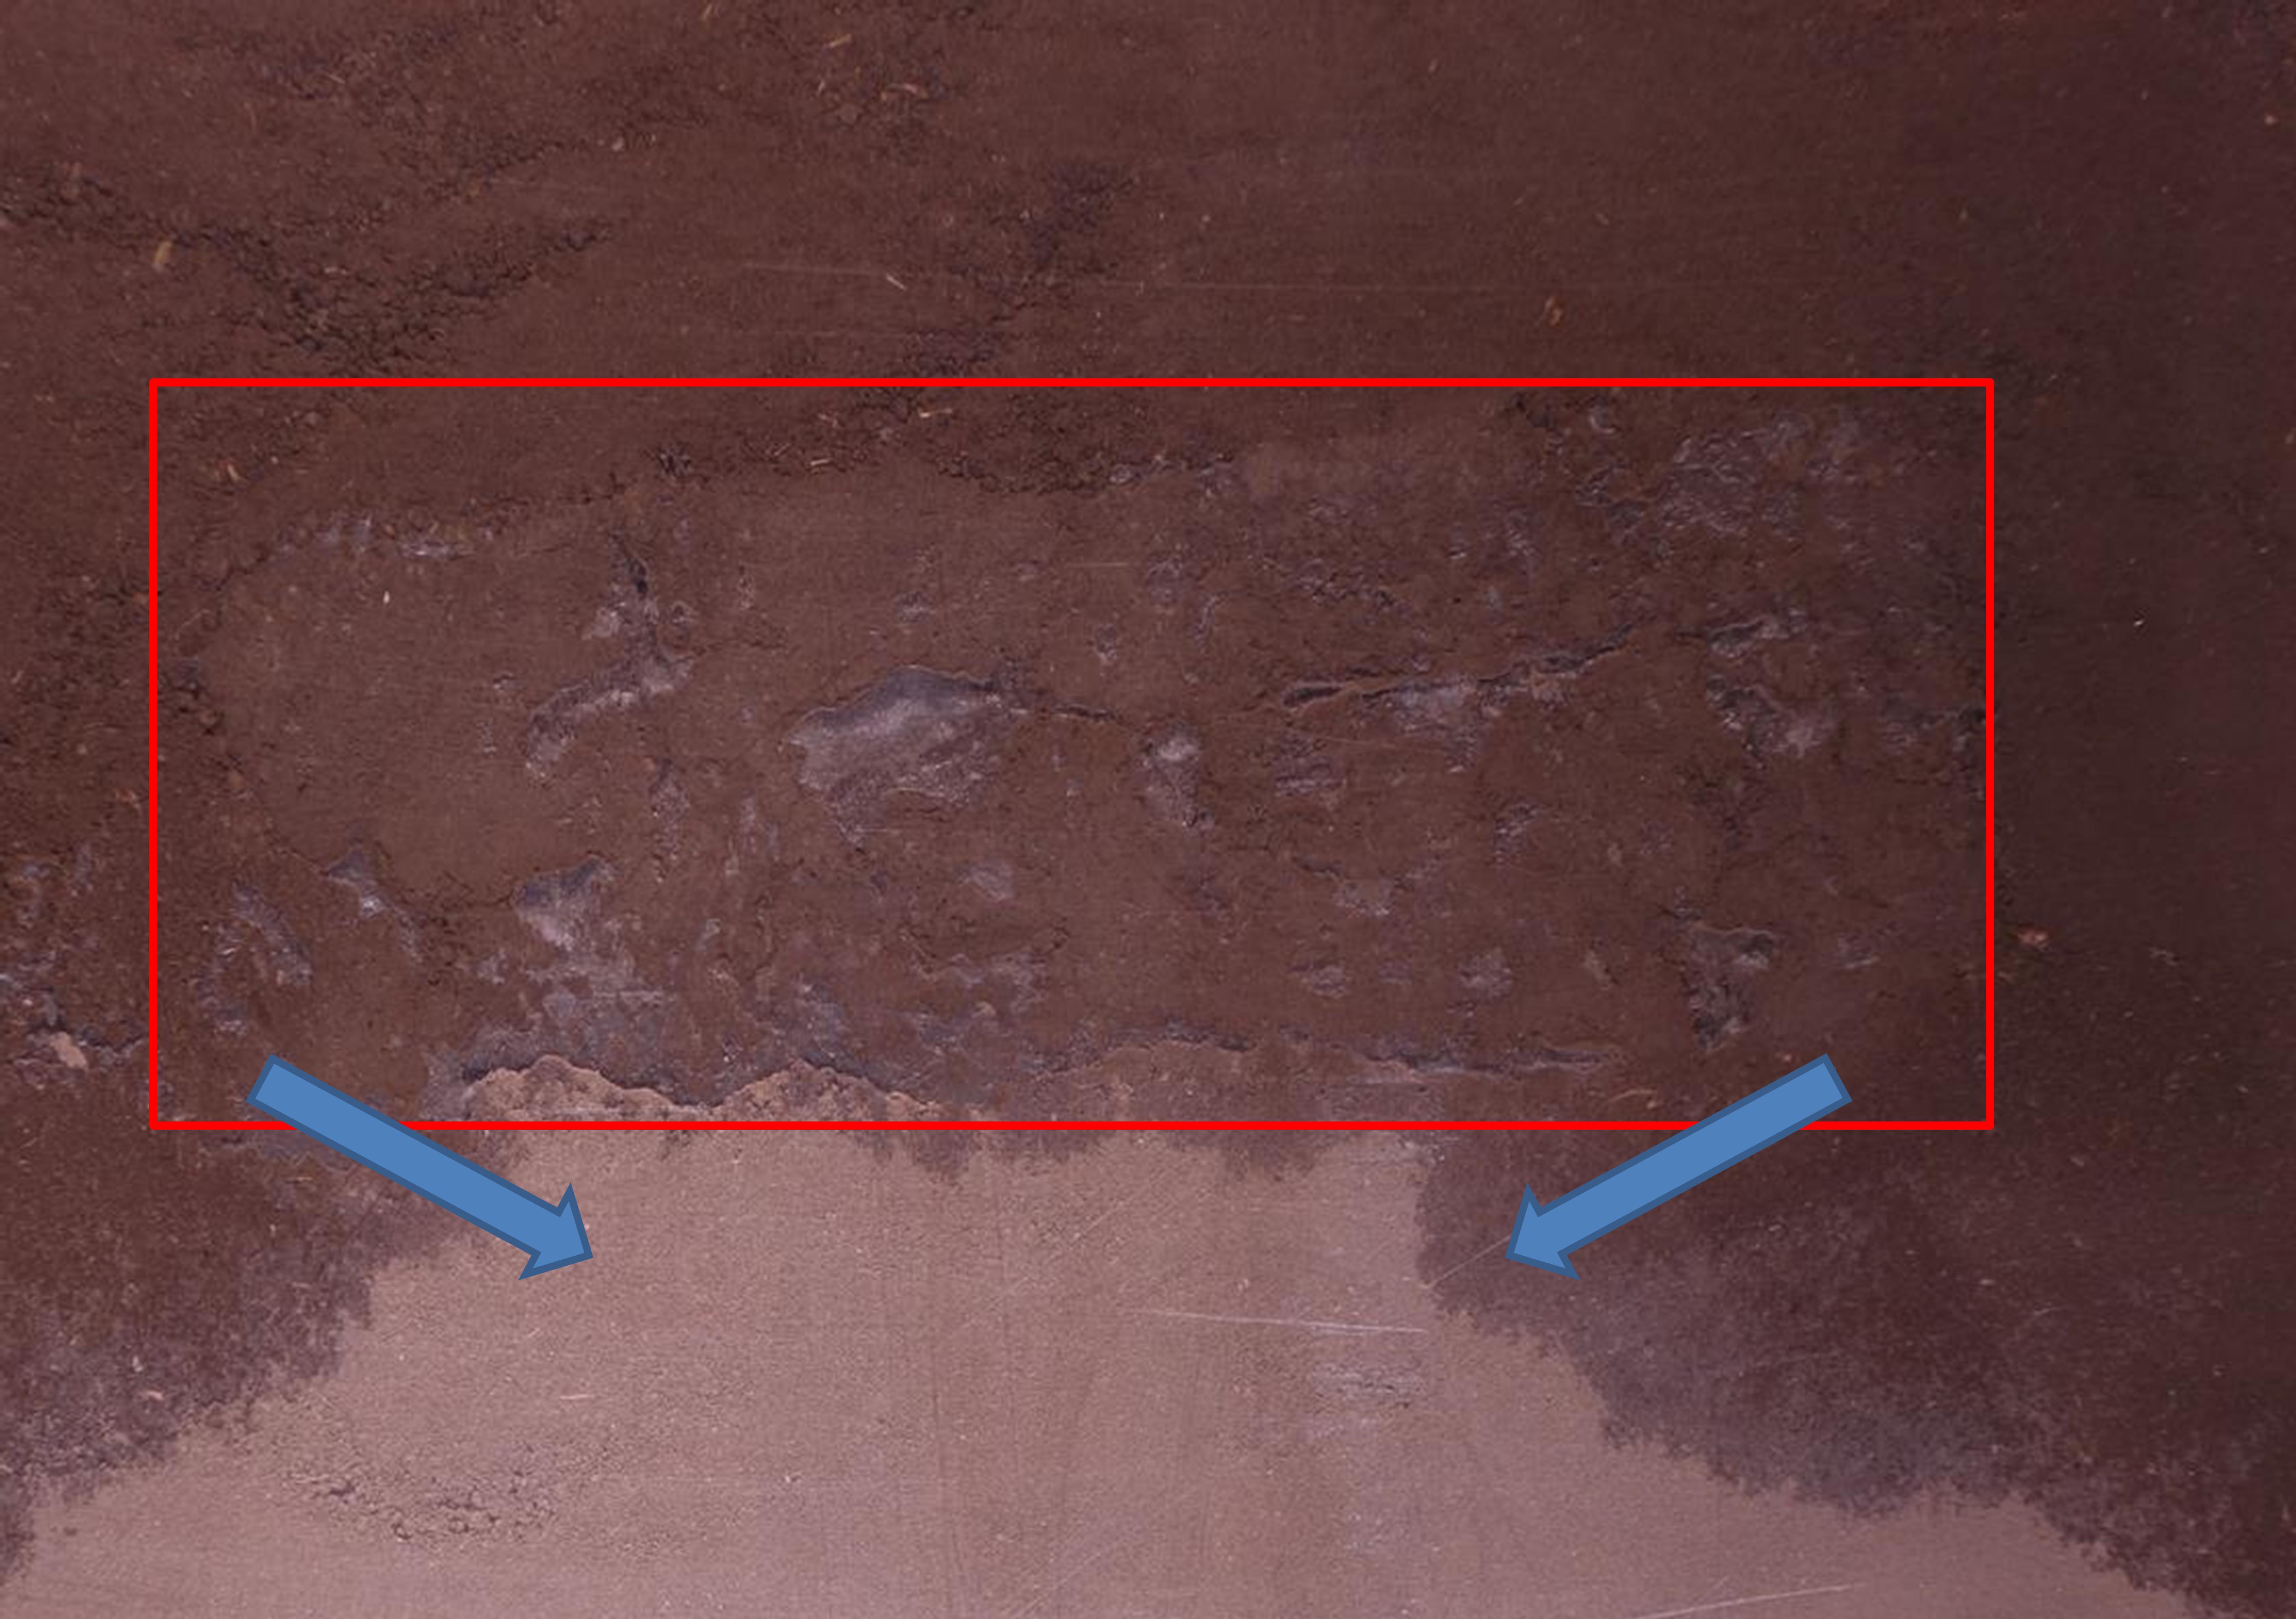 Water, as it drains through the soil profile, is limited by a zone of highly compacted soil (outlined by the red box).